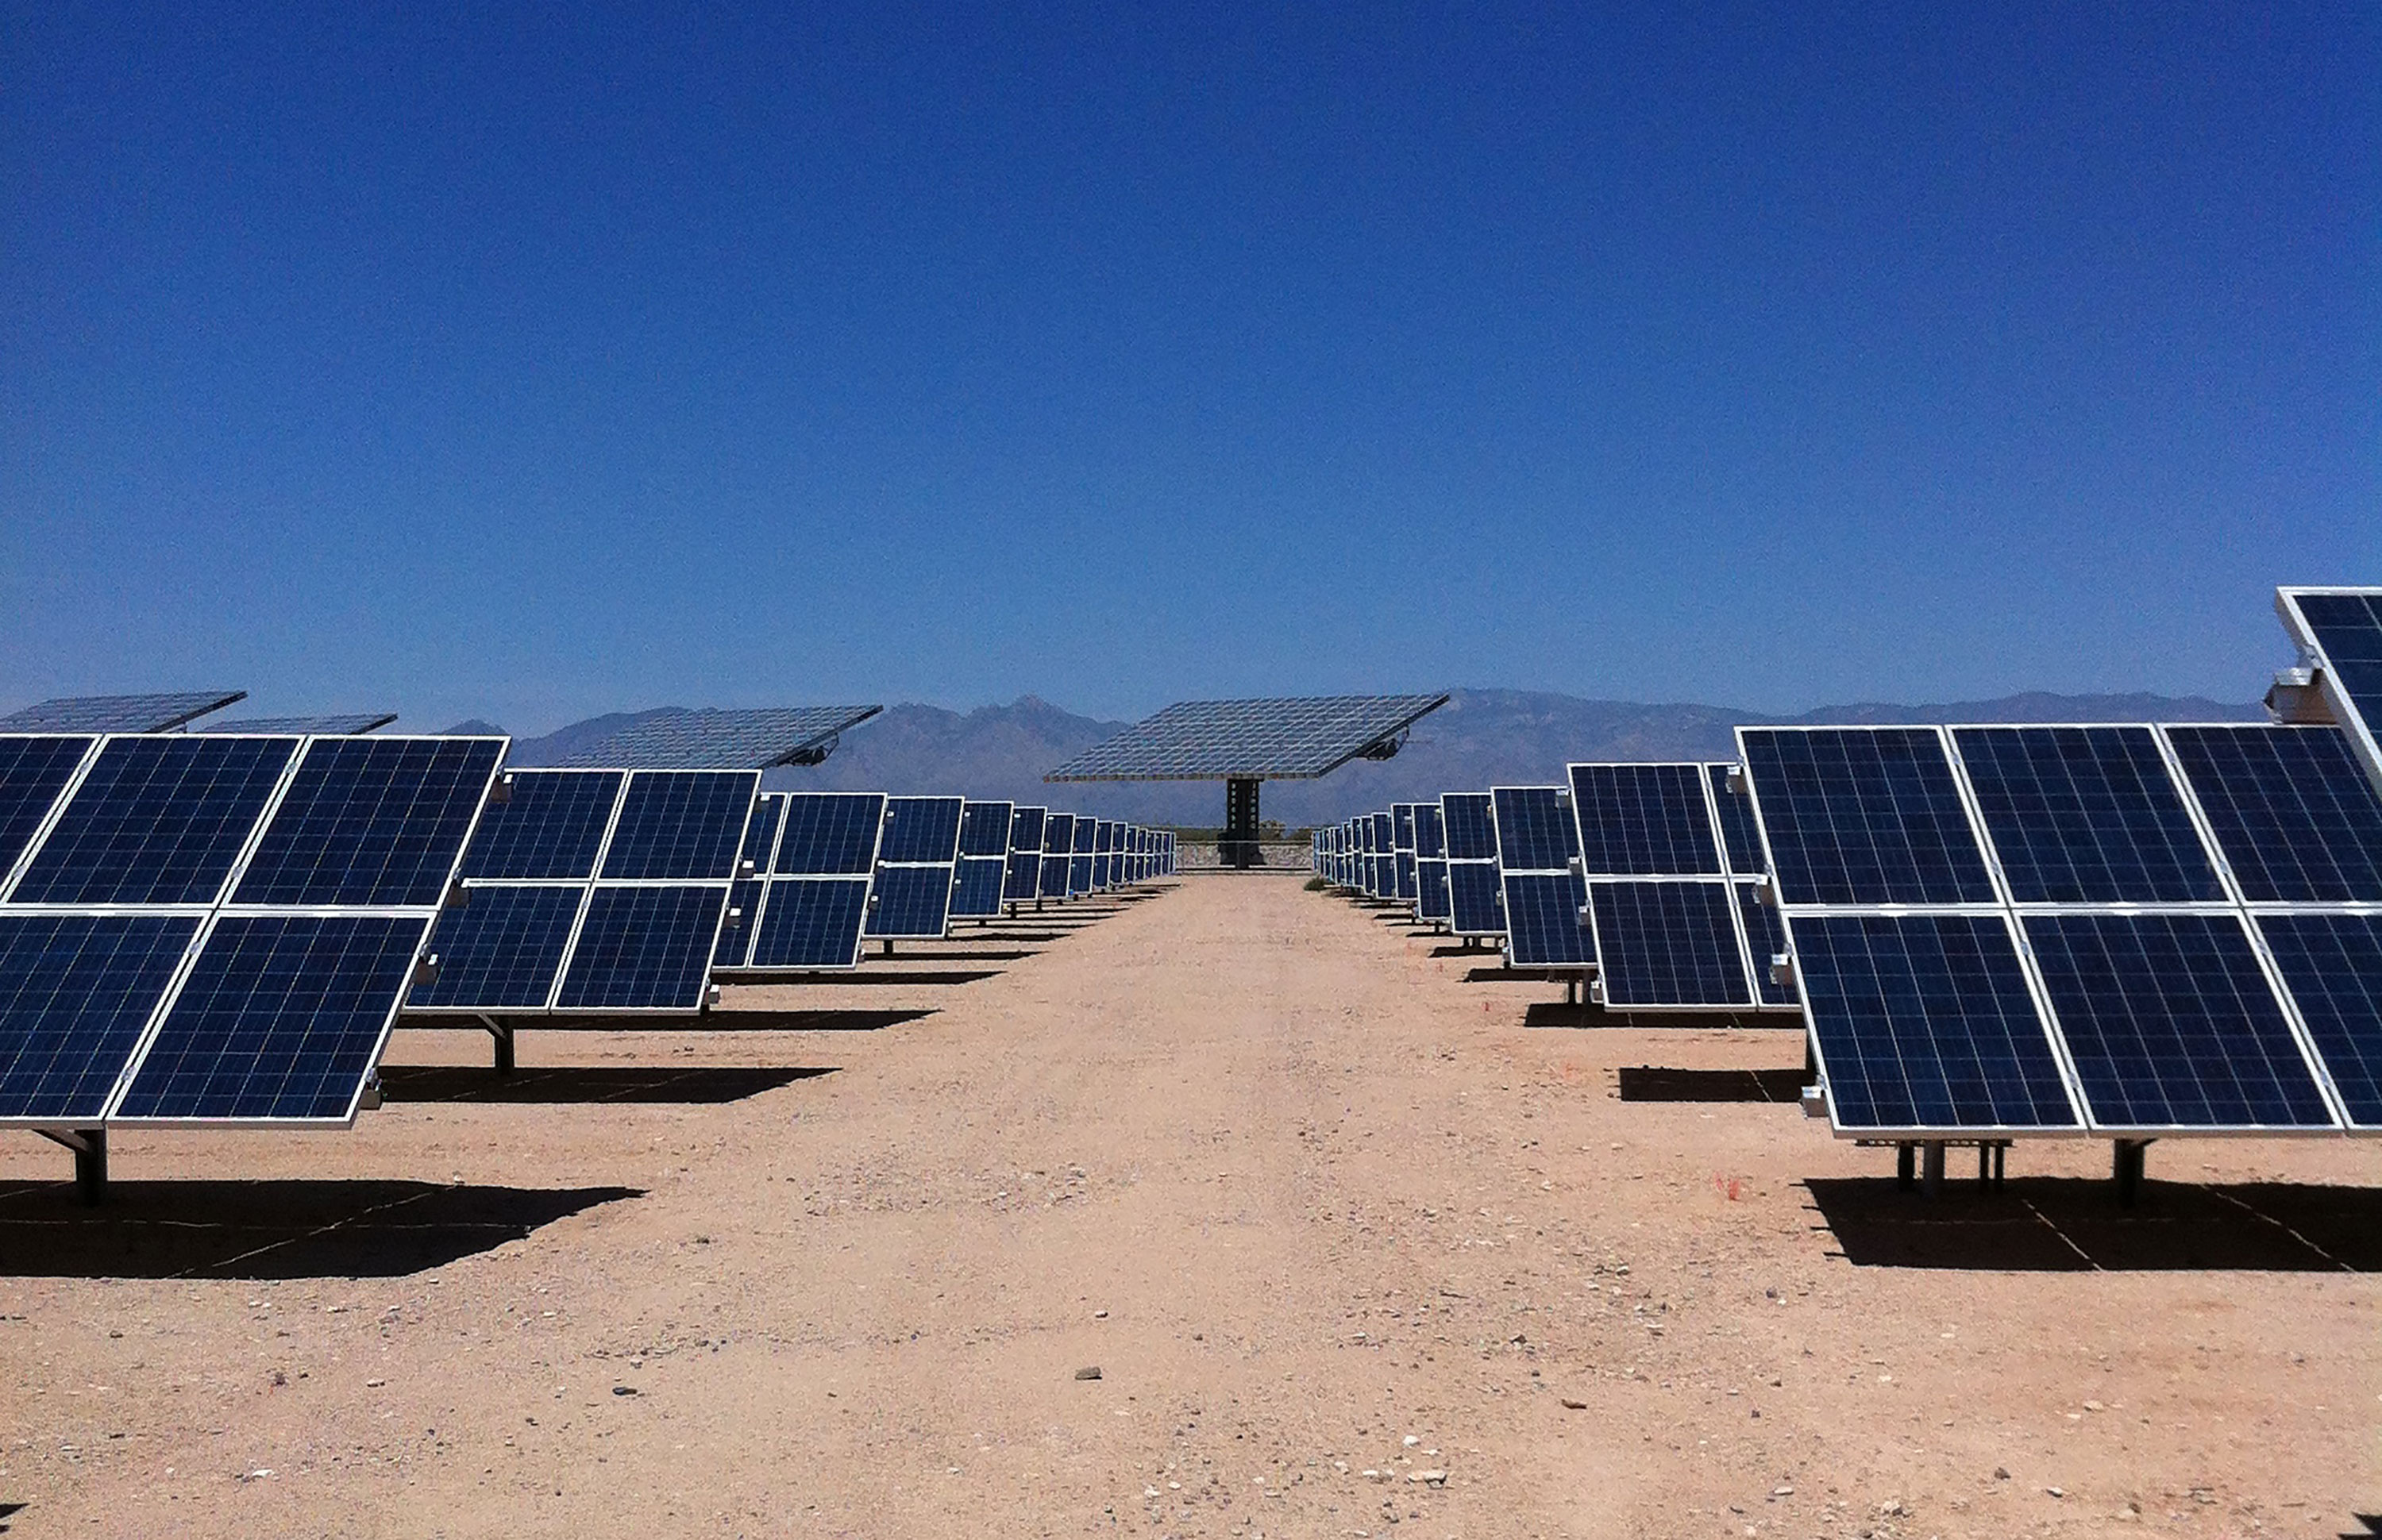 Soilworks® Dust Control Solutions Helps Complete One of Arizona's Largest Solar Energy Projects